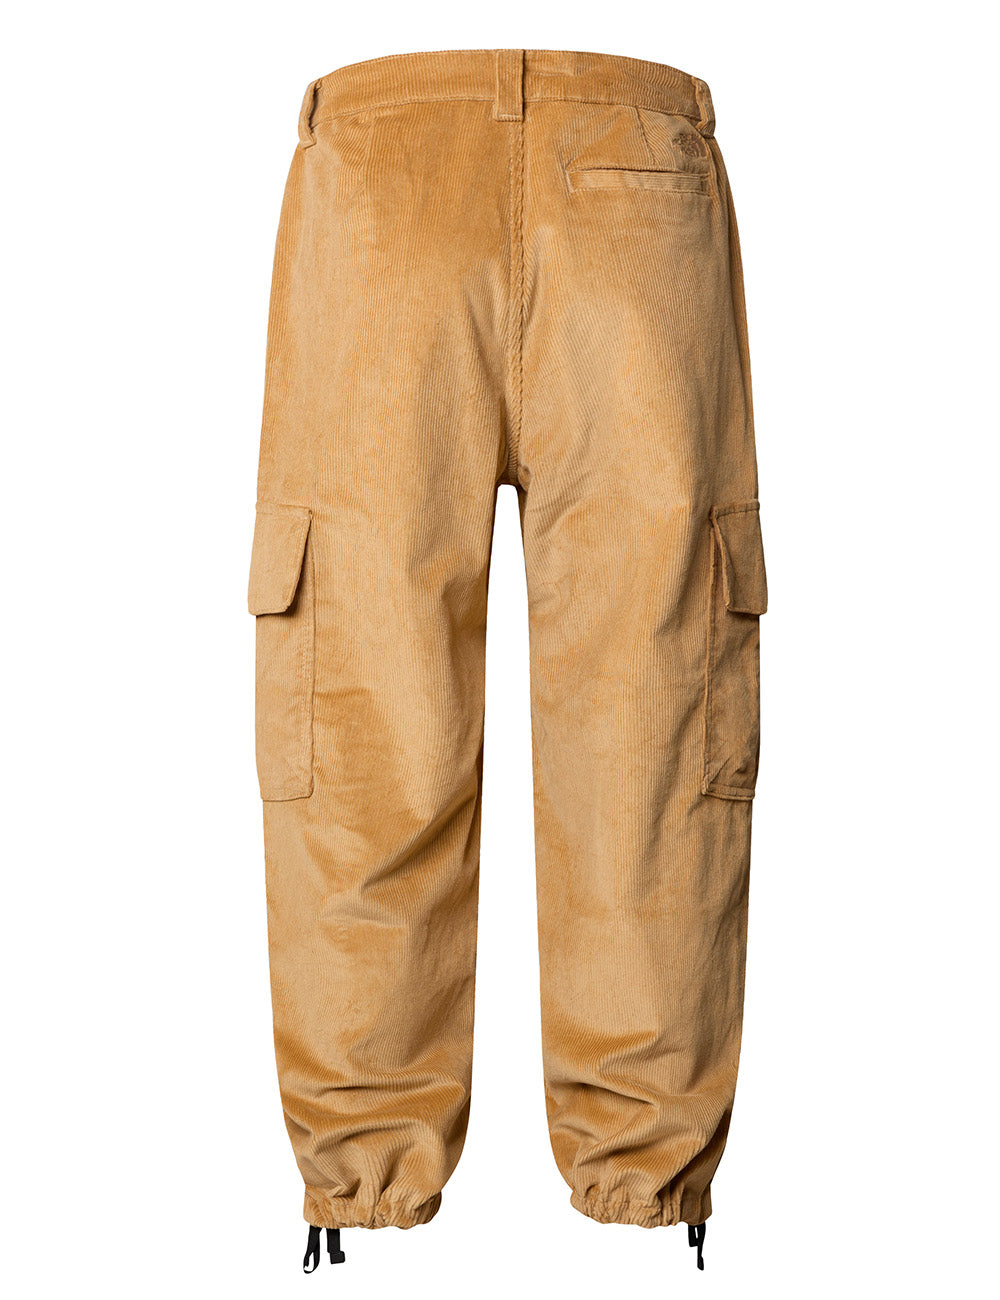 THE NORTHFACE WOMEN'S UTILITY CORD PANT